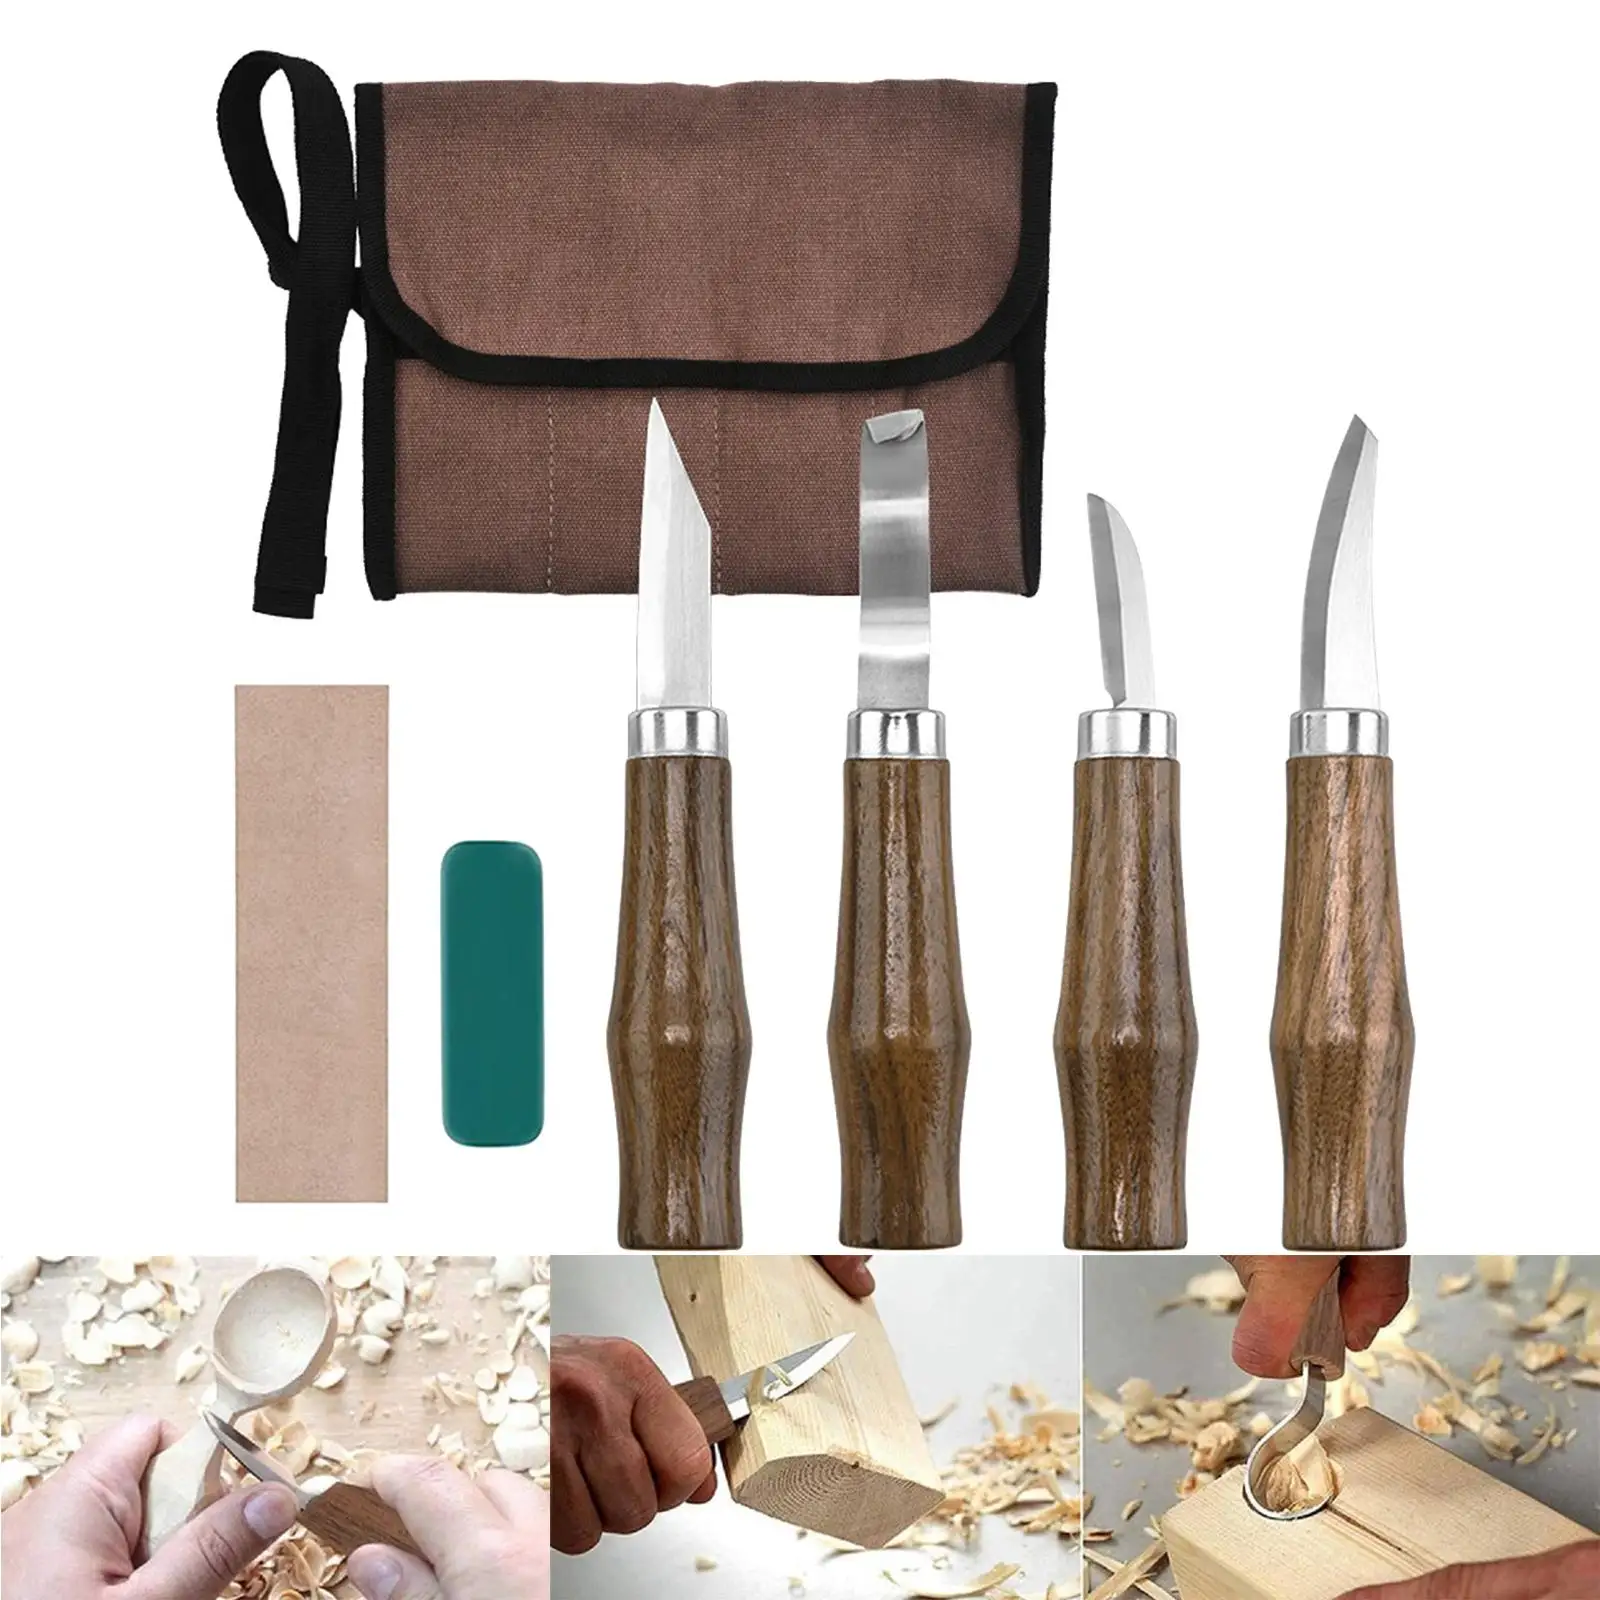 7Pcs Professional Wood Carving Kit Woodworking Cutter Carpenter Tool Crafts Detail Cutter DIY for Adults Kids Beginners